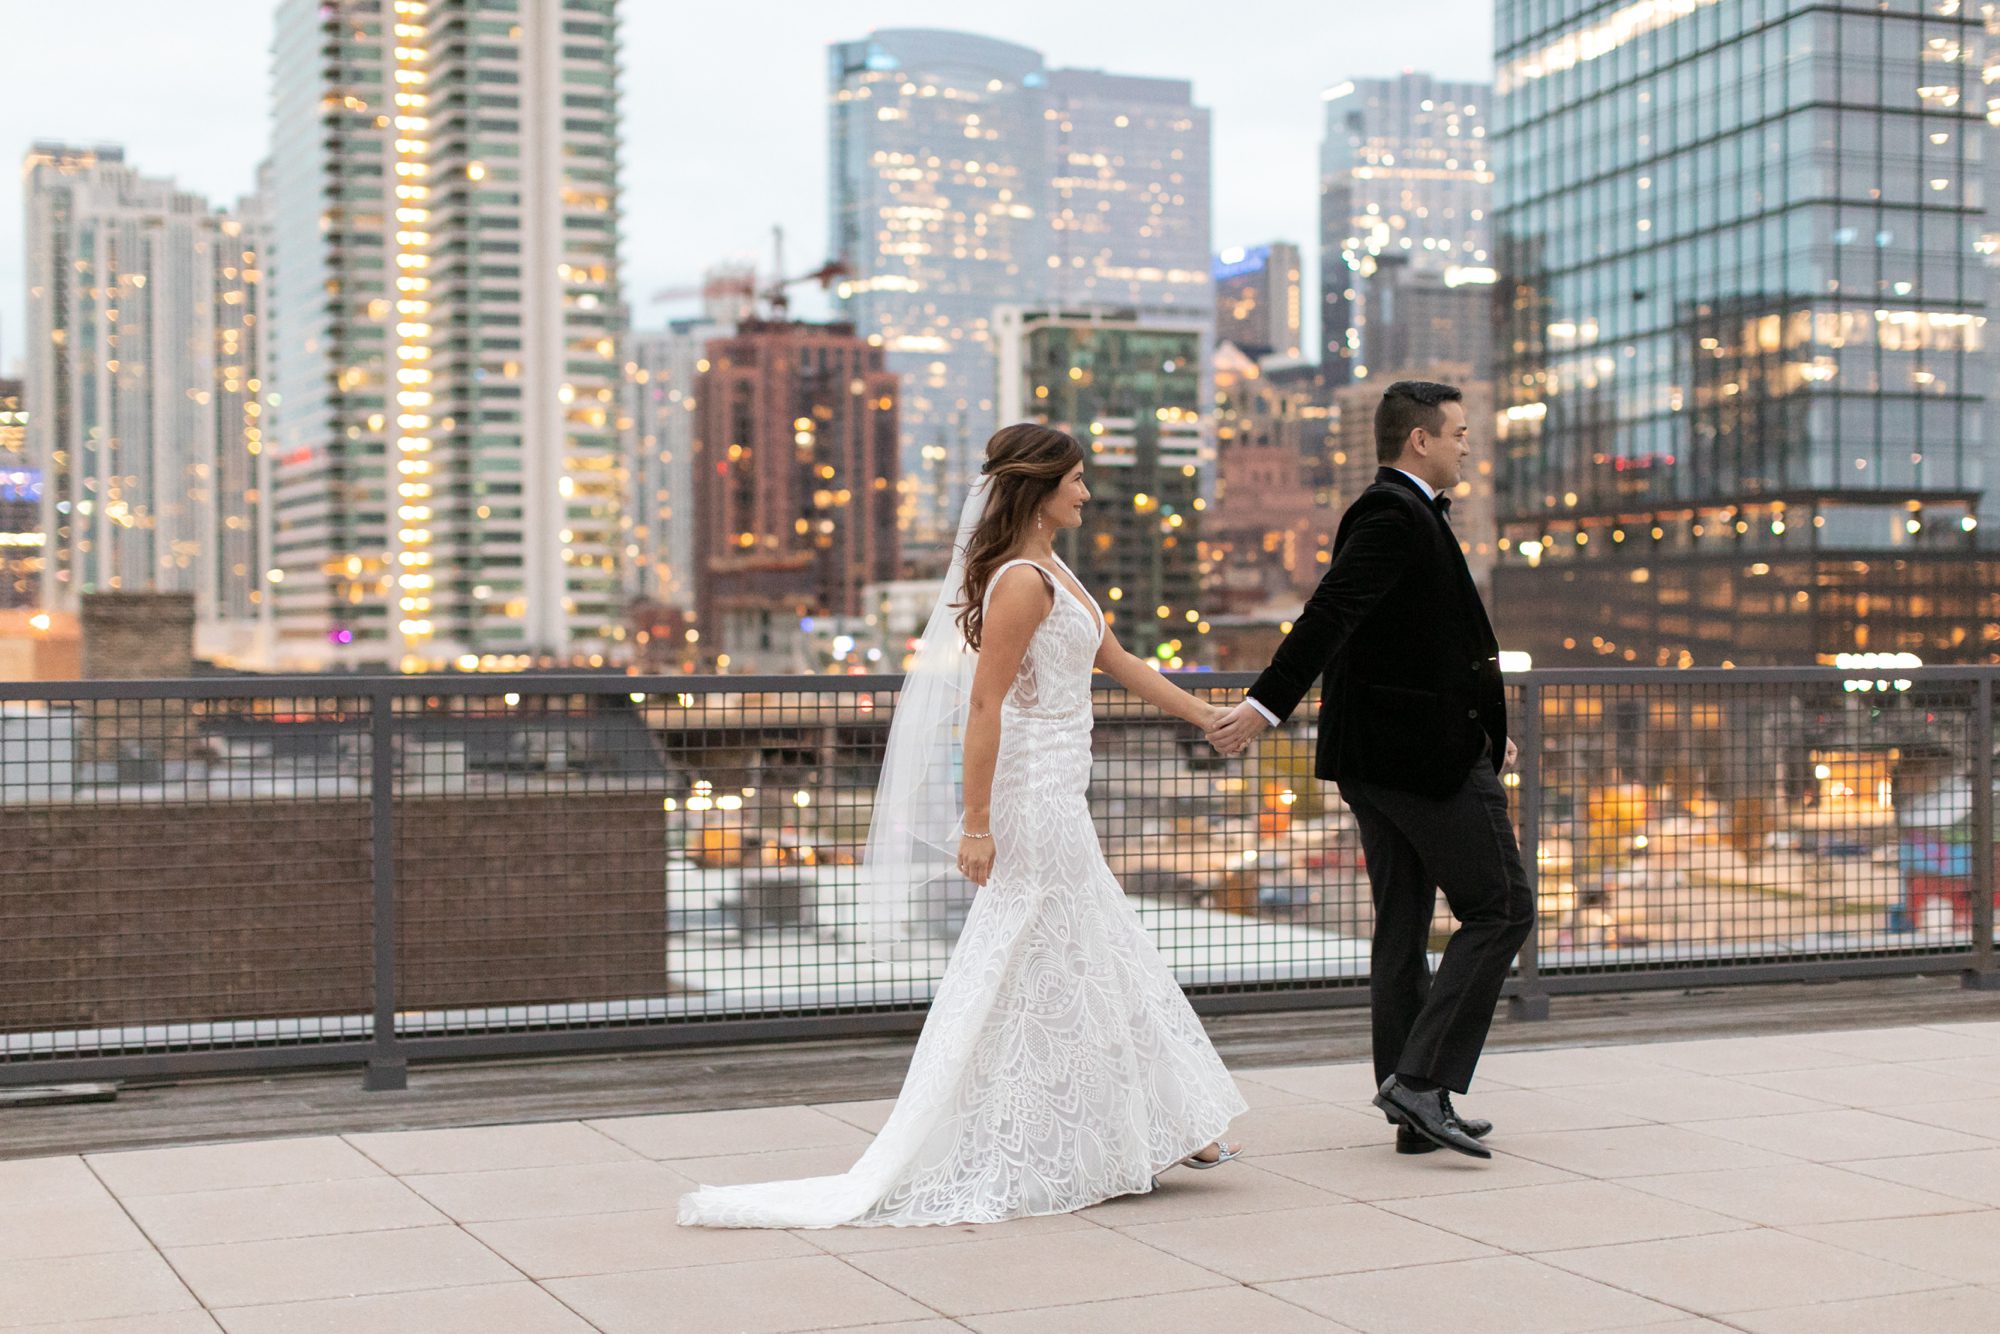 the bride and groom posed with the Chicago Skyline